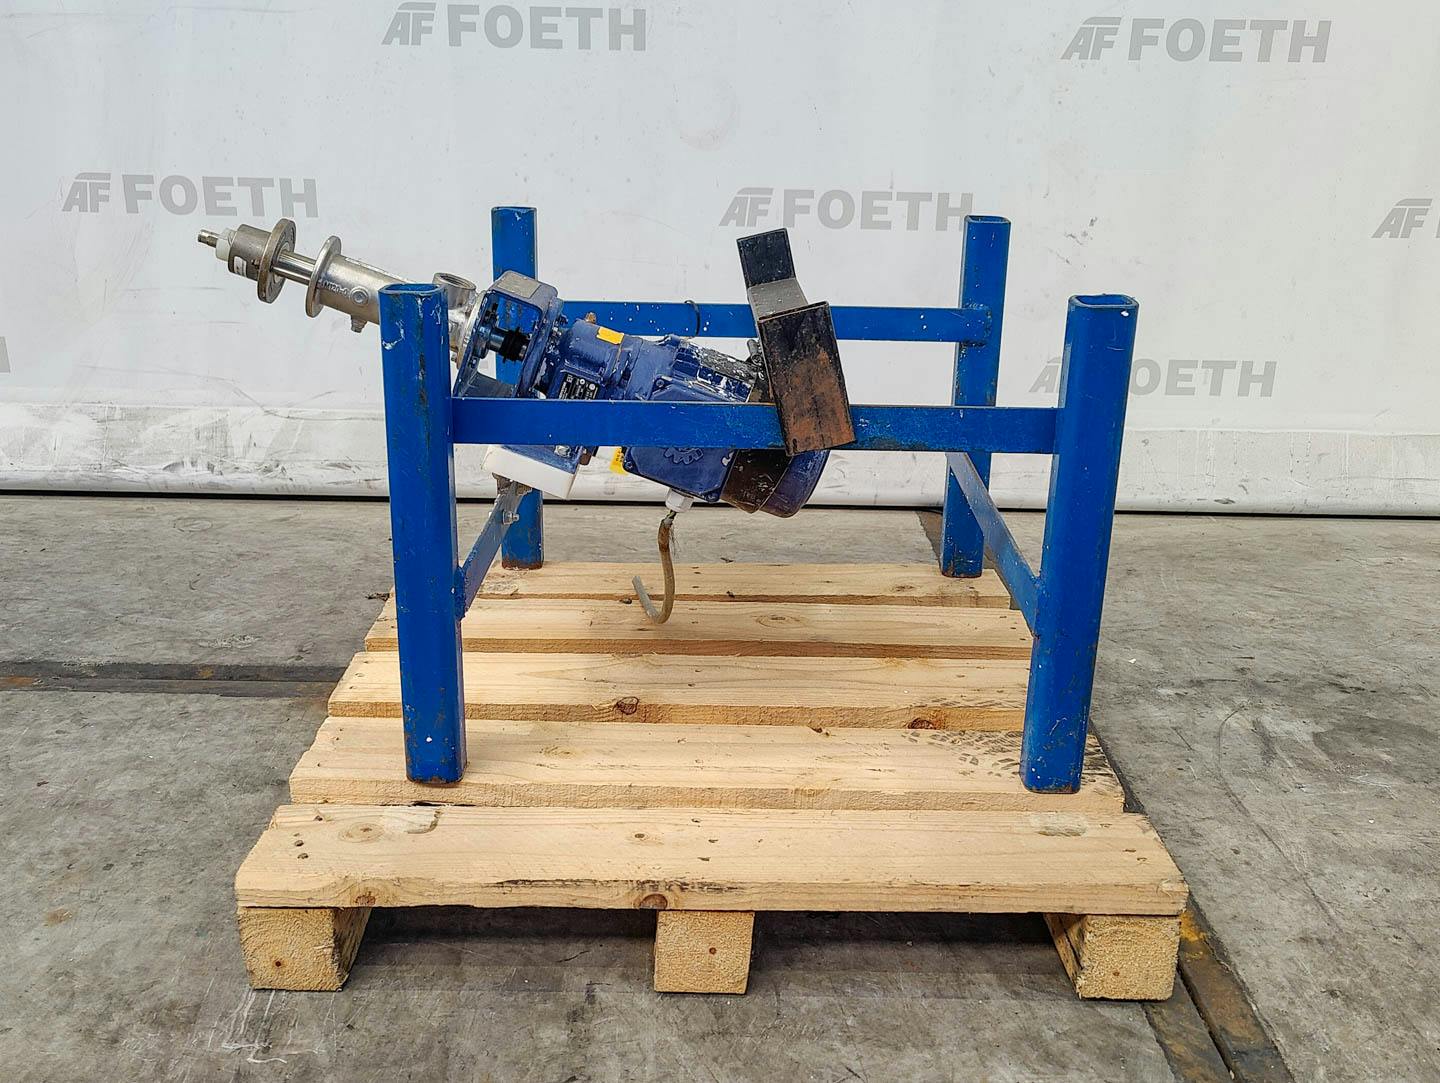 Seepex MD 003-12 - Positive displacement pump - image 1